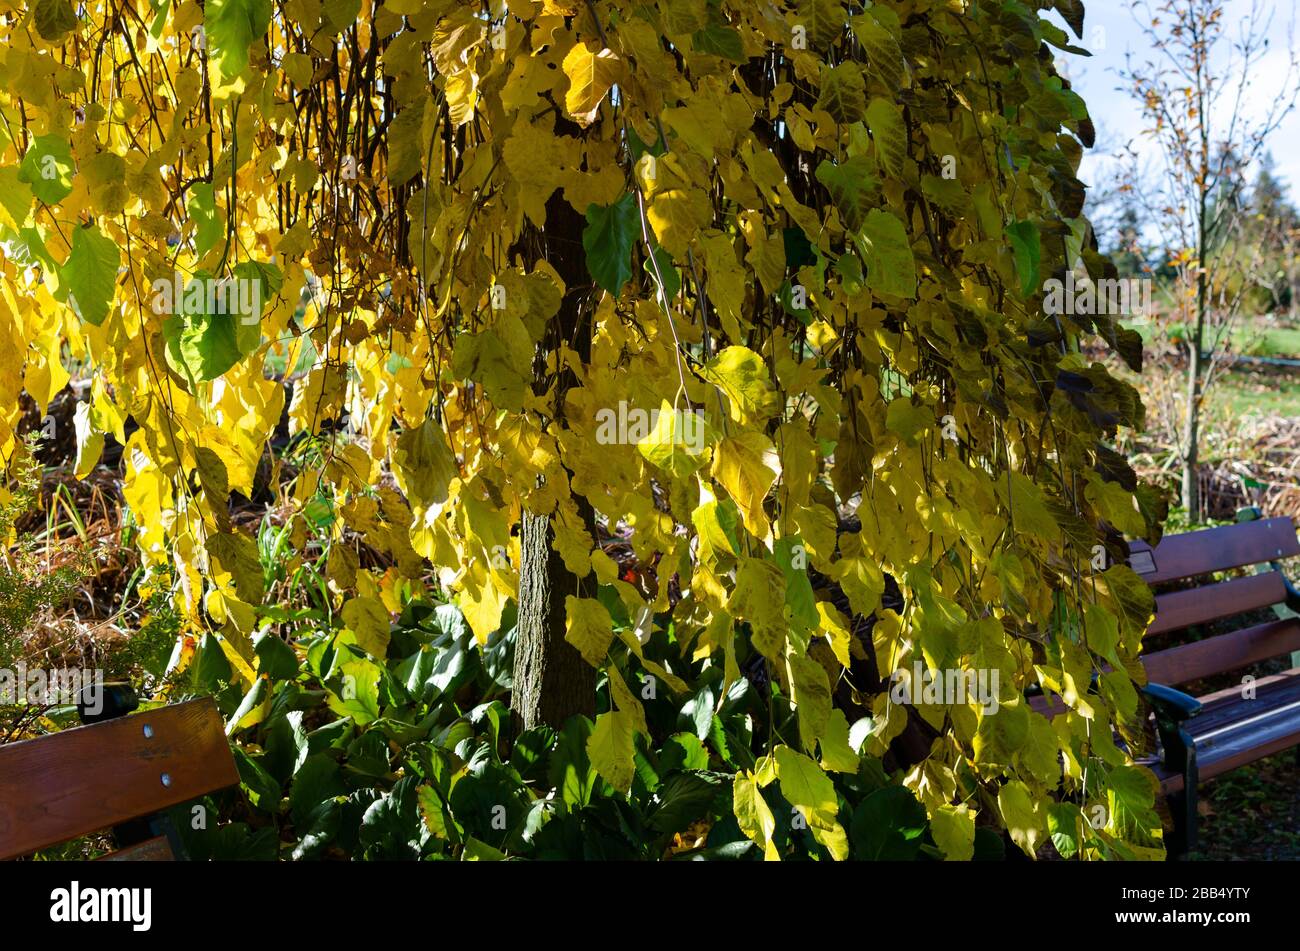 Weeping mulberry - (morus alba pendula) in autumn with green and yellow leaves. Botanical arboretum, Niemcza, Poland Stock Photo